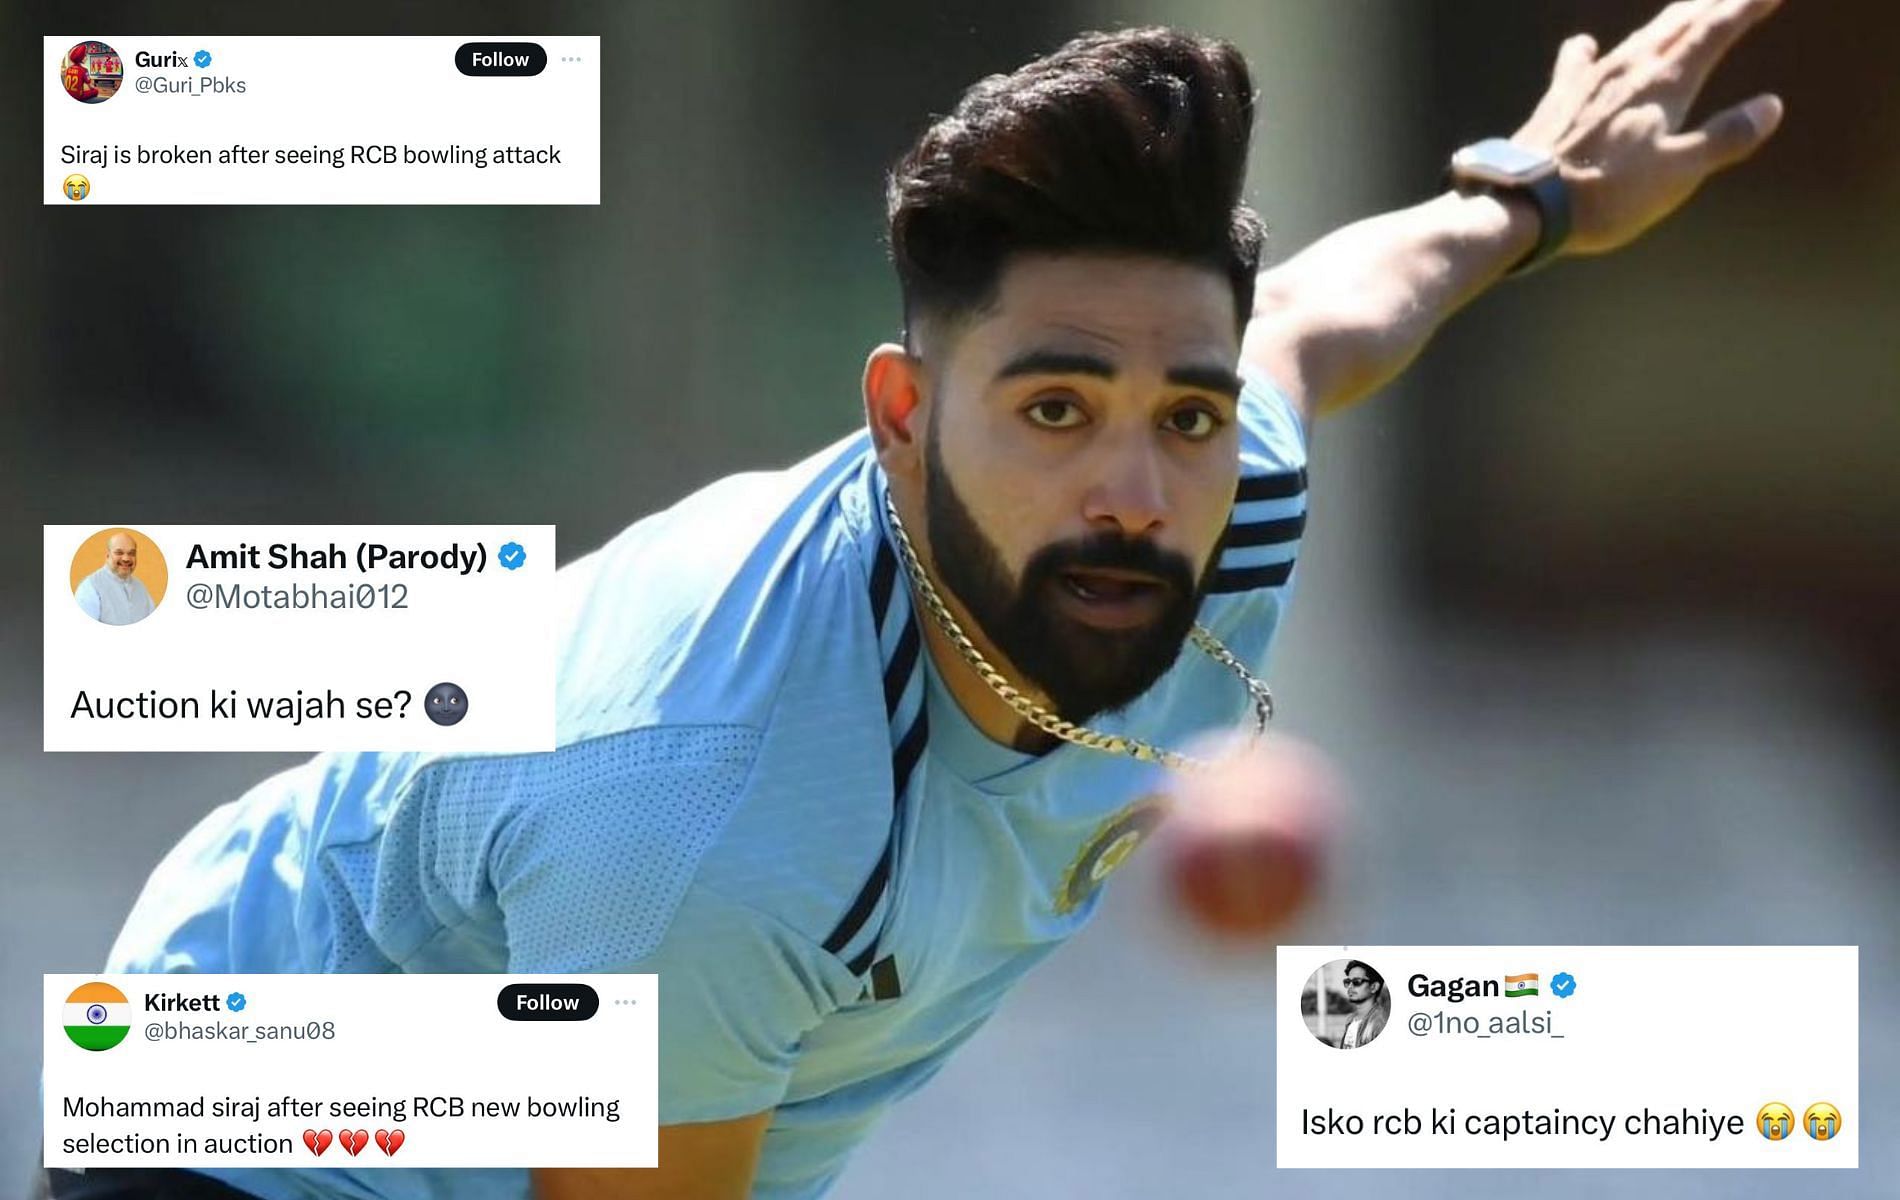 Mohammed Siraj is part of India